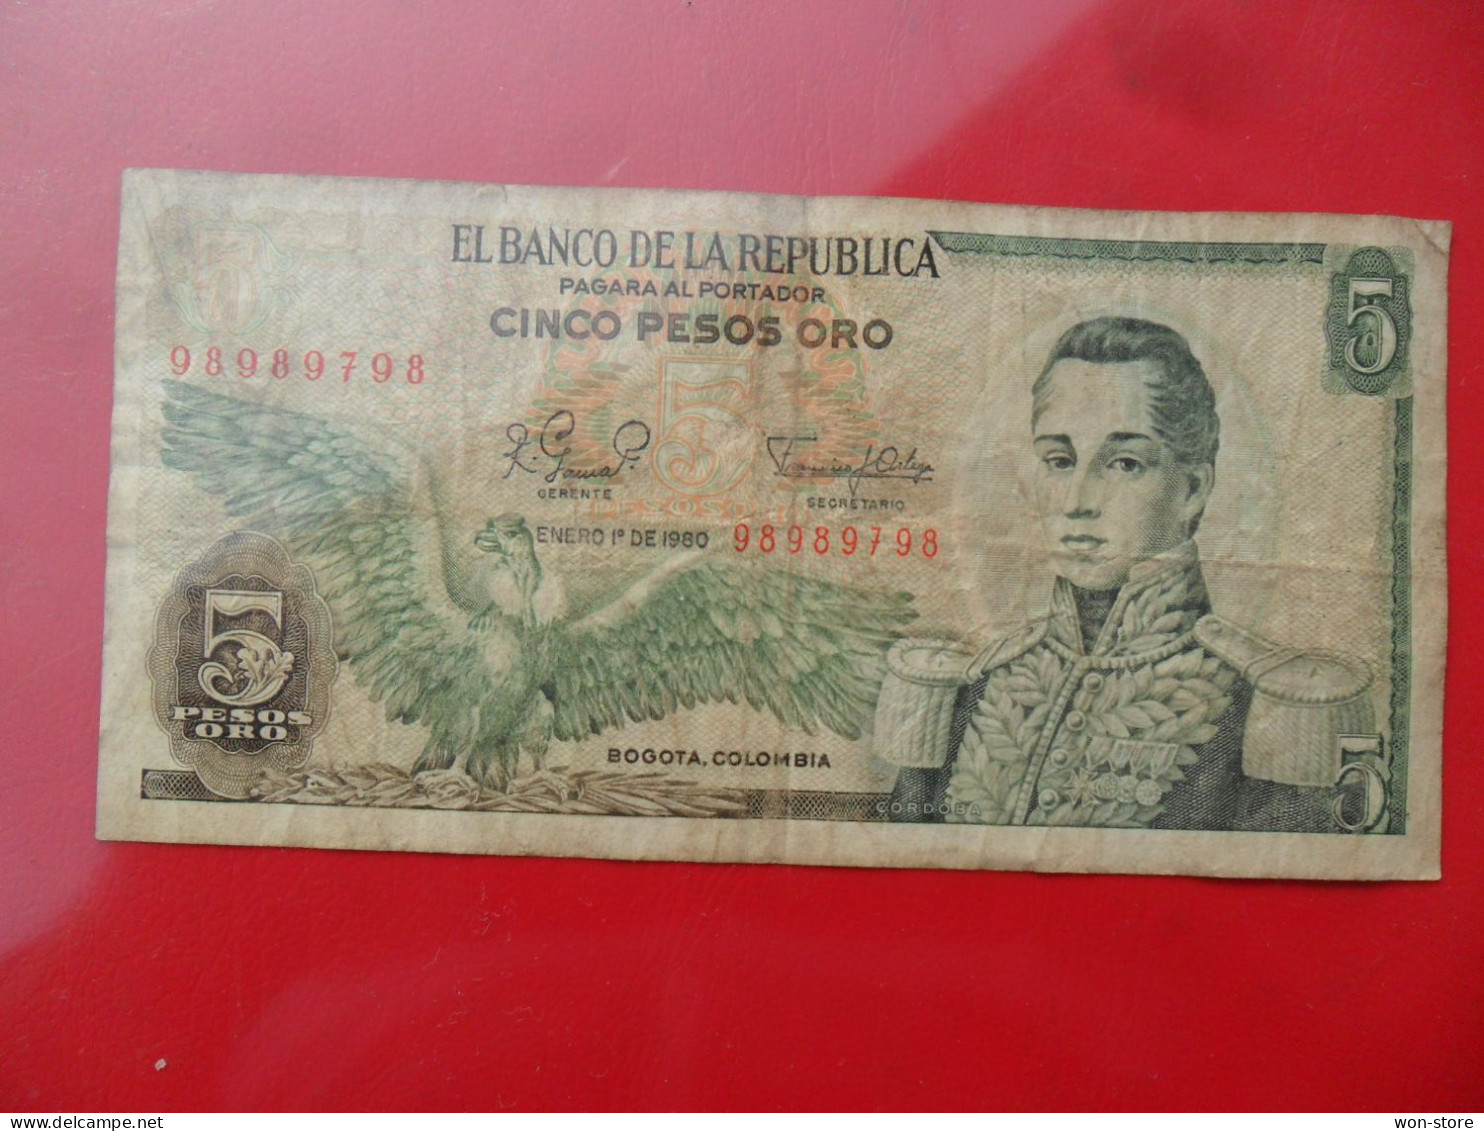 2959 - Colombia 5 Pesos Oro 1980 - Interesting Numbers 98989798 - Colombia